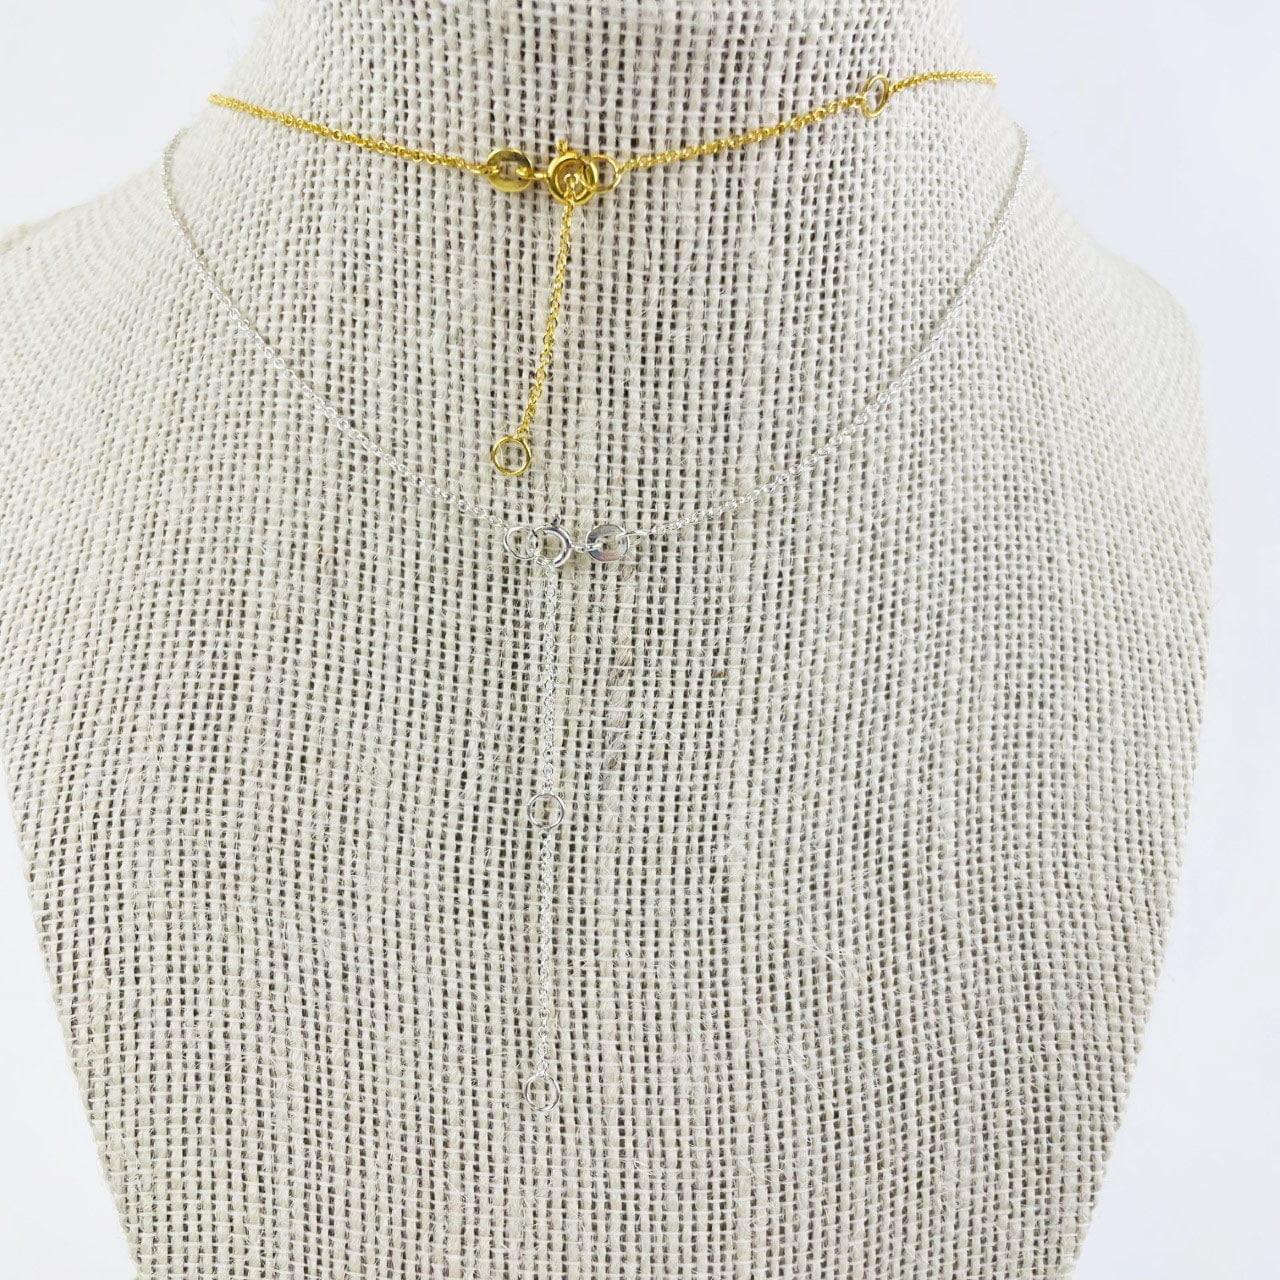 Back of necklaces showing clasps in gold and silver